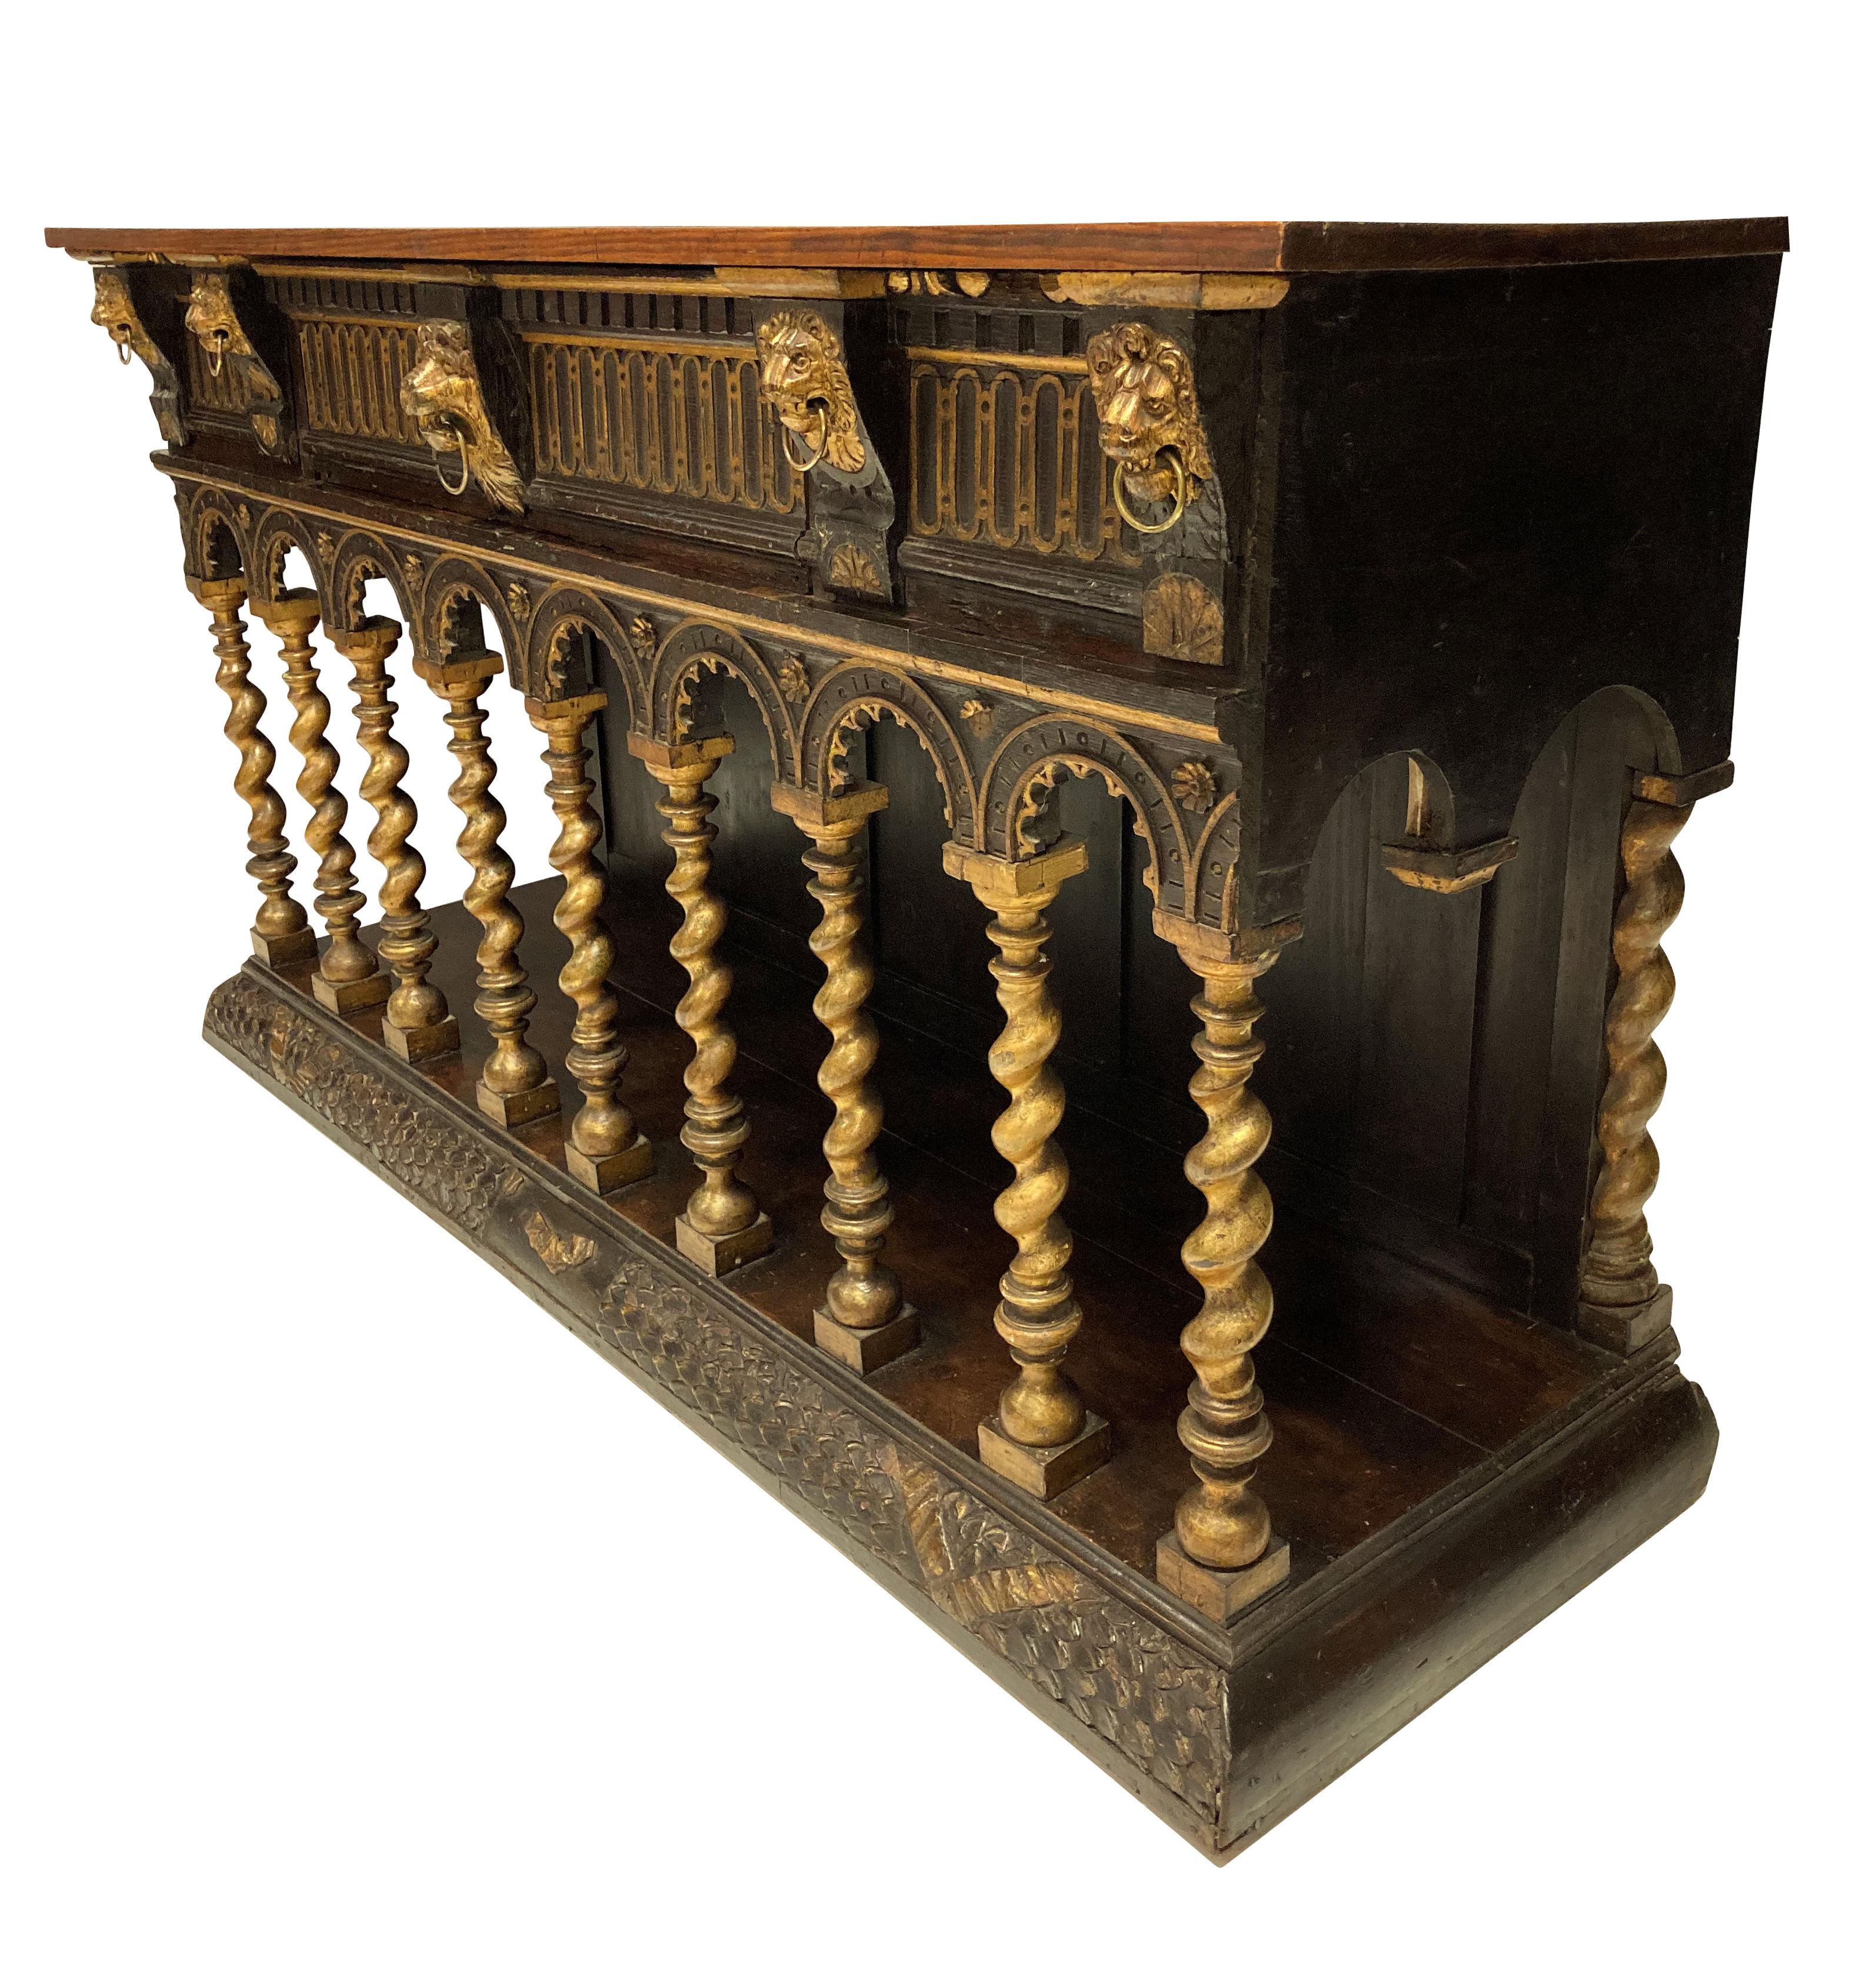 Late 19th Century English Romanesque Sideboard in the Manner of William Burges